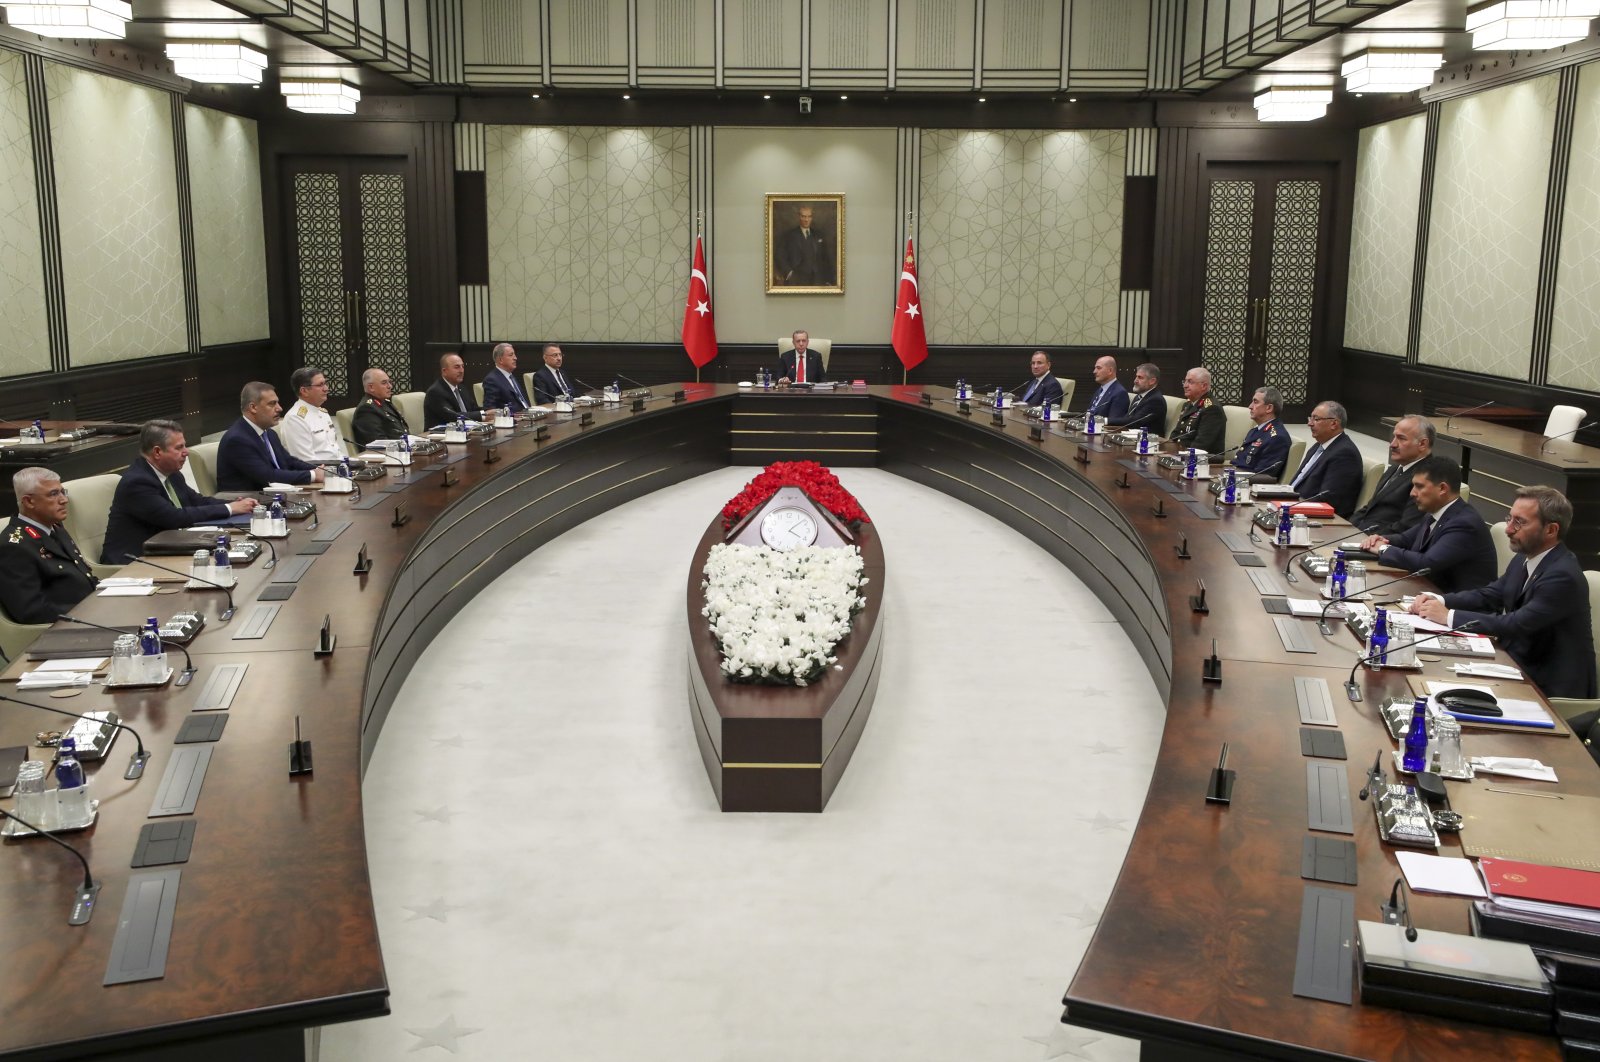 The National Security Council, led by President Recep Tayyip Erdoğan, convenes at the Presidential Complex in Ankara, Turkey, July 21, 2022. (AA Photo)